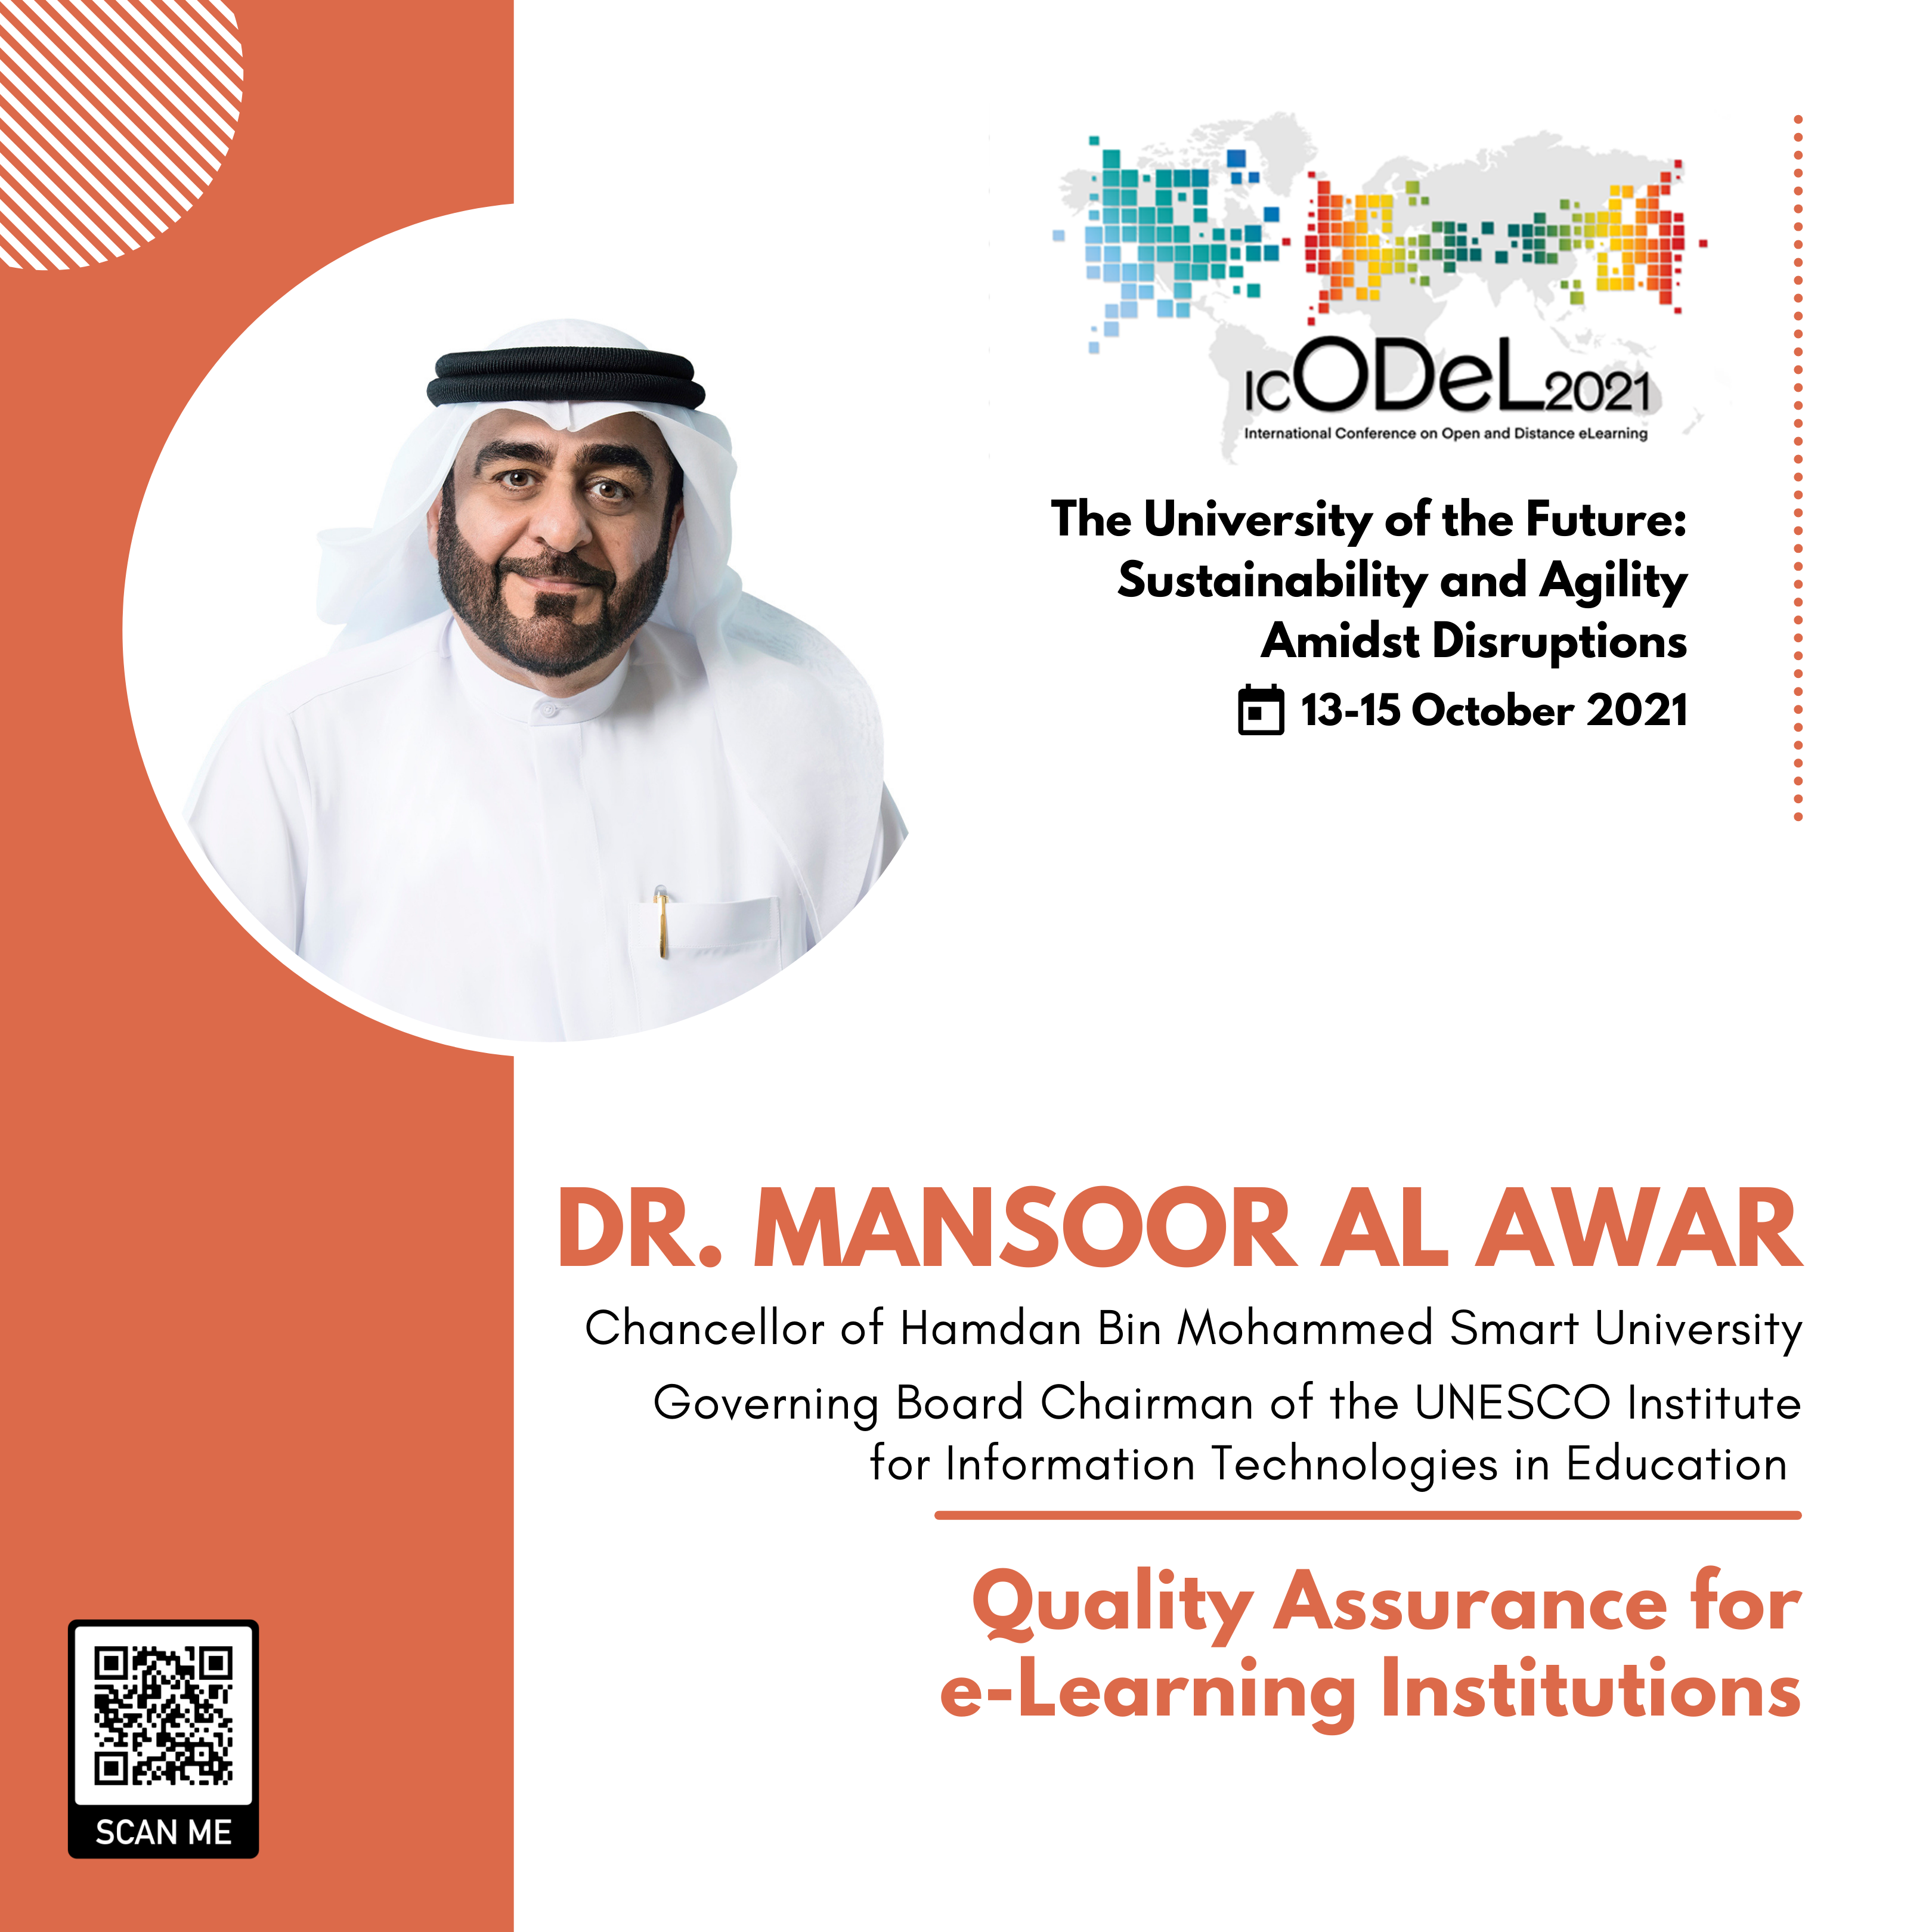 Hamdan Bin Mohammed Smart University (HBMSU) Chancellor and Governing Board Chairman of the United Nations Educational, Scientific, and Cultural Organization (UNESCO) Institute for Information Technologies in Education, Dr. Mansoor Al Awar, will be a Plenary Speaker for the 4th International Conference on Open and Distance e-Learning (ICODeL 2021).